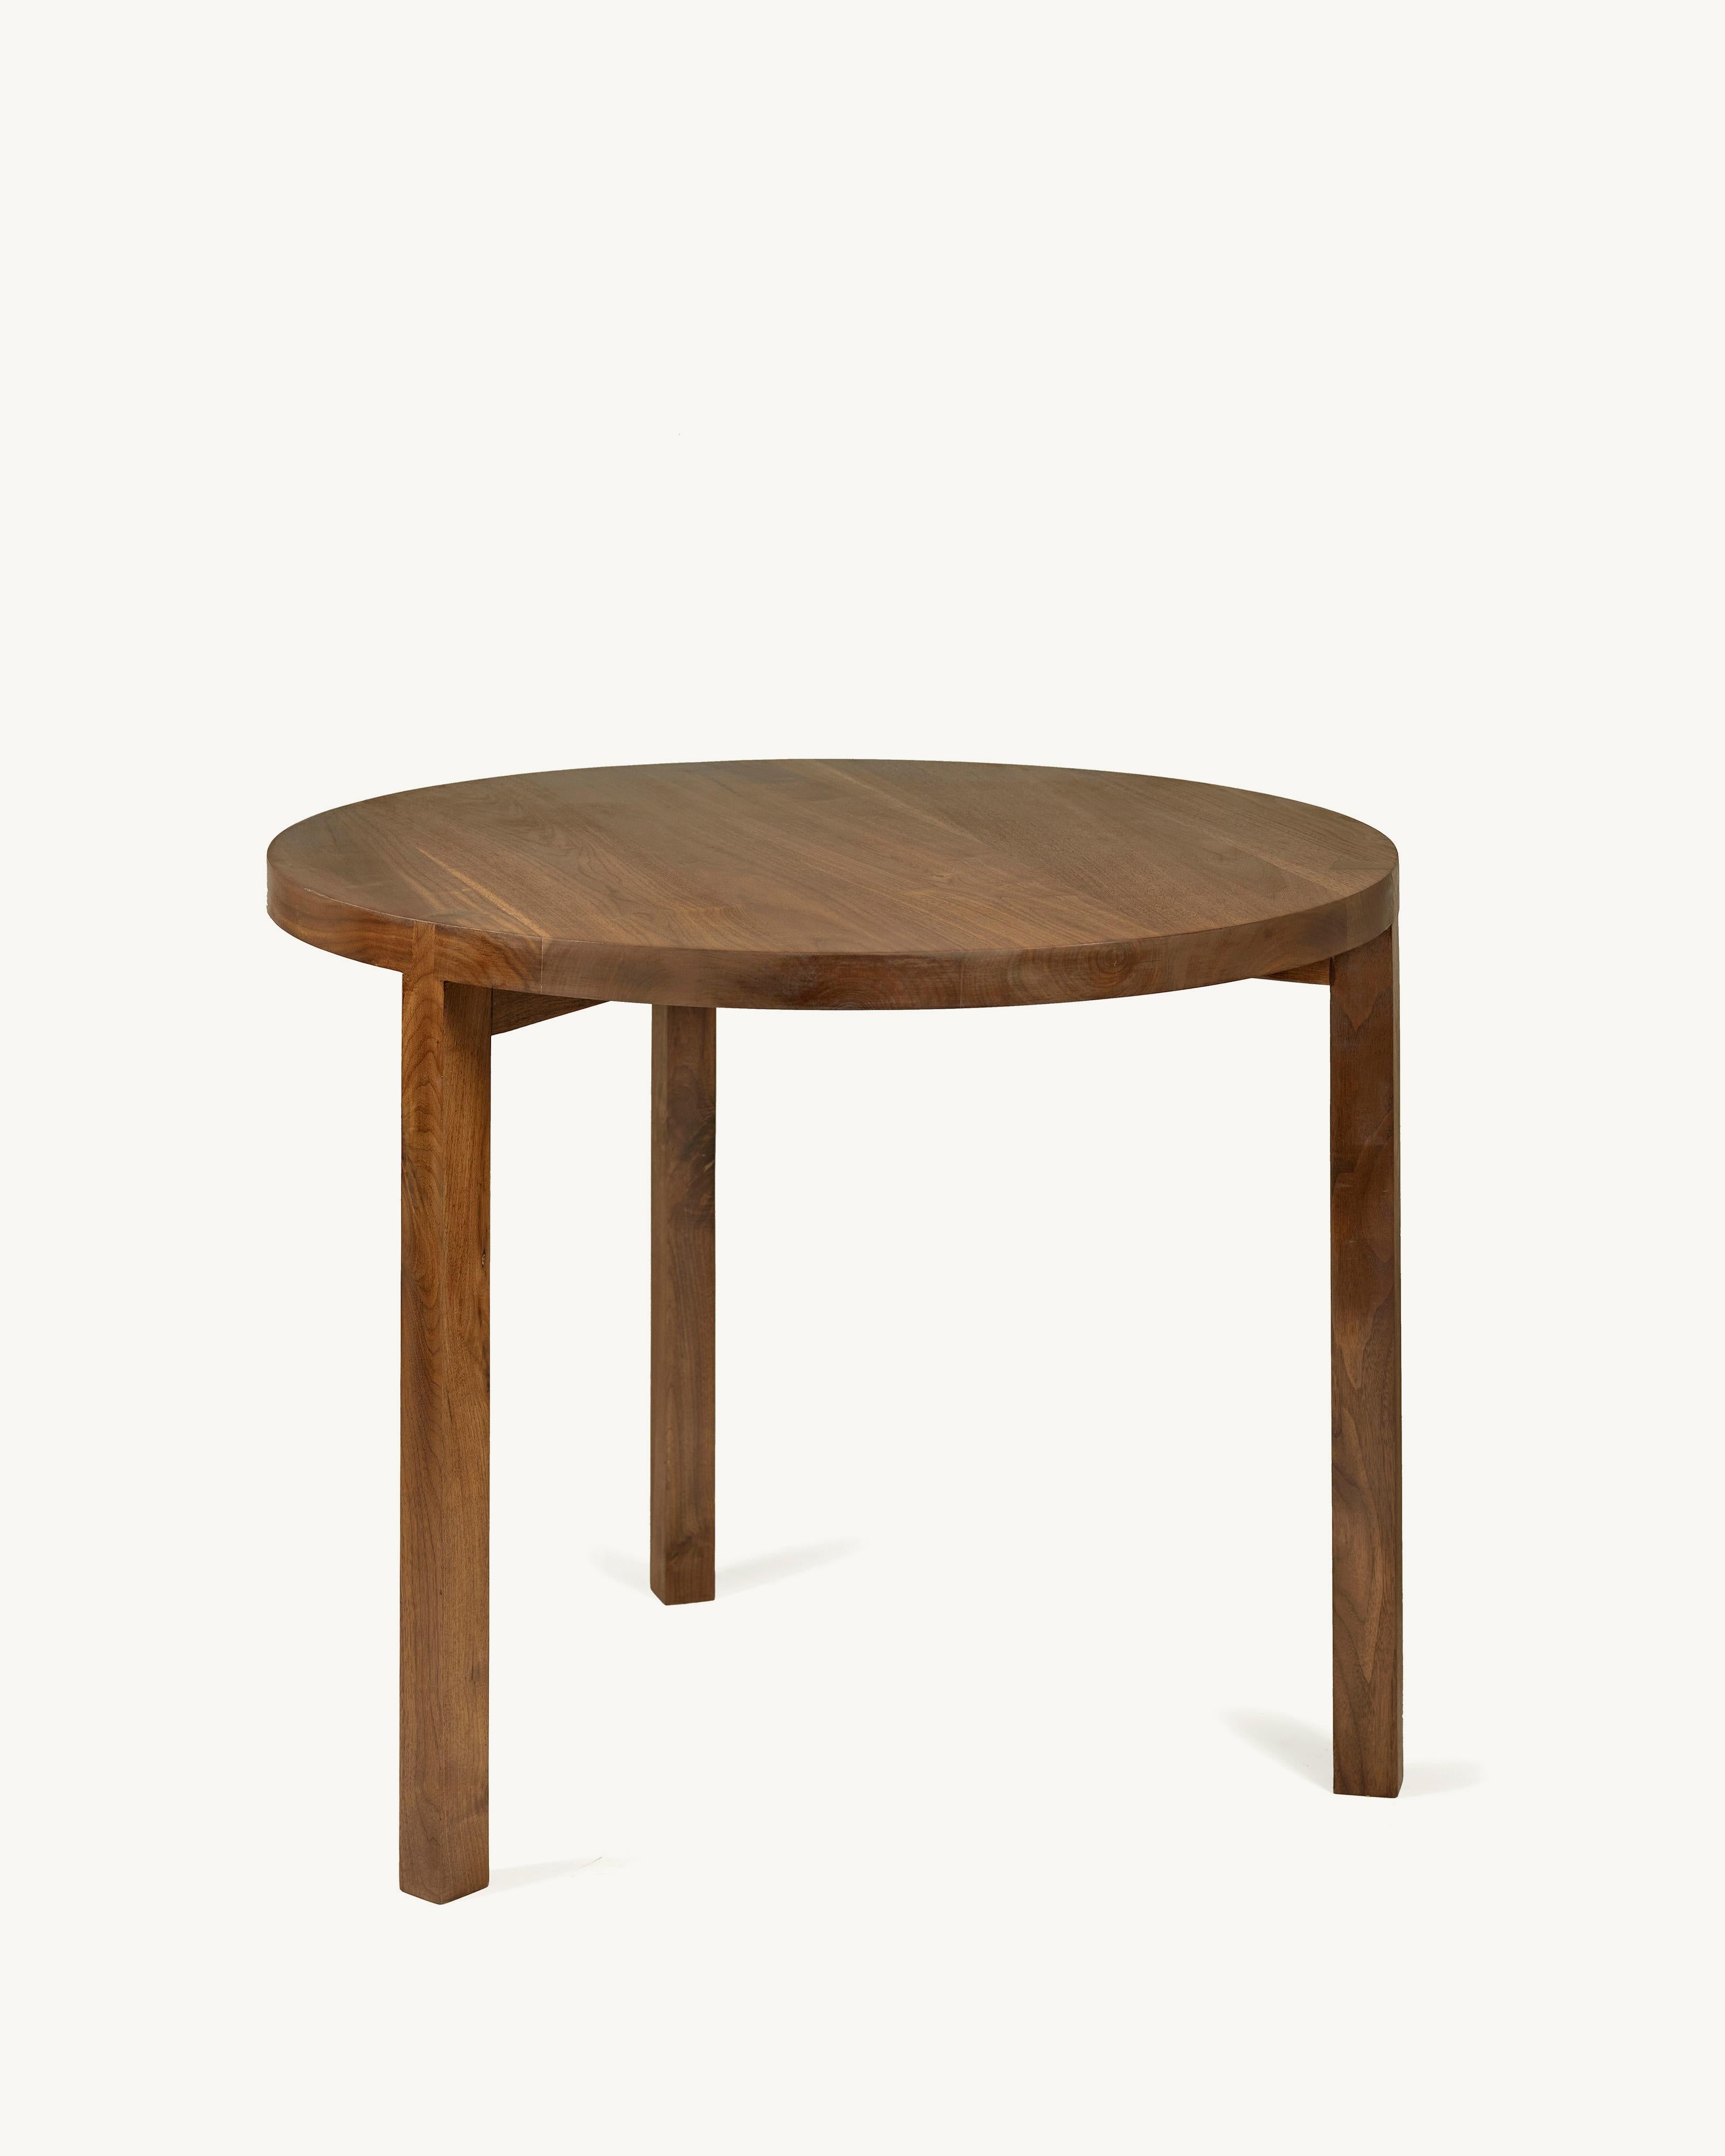 Round Dining Table in Walnut 'Solid' by Atelier 365 x Valerie Objects
Dimensions: D. 90 x H. 75

Fascinated by traditional wood joints, Greindl constructs wooden furniture without any nails or screws. Every joint is cut by hand, using chisels and a